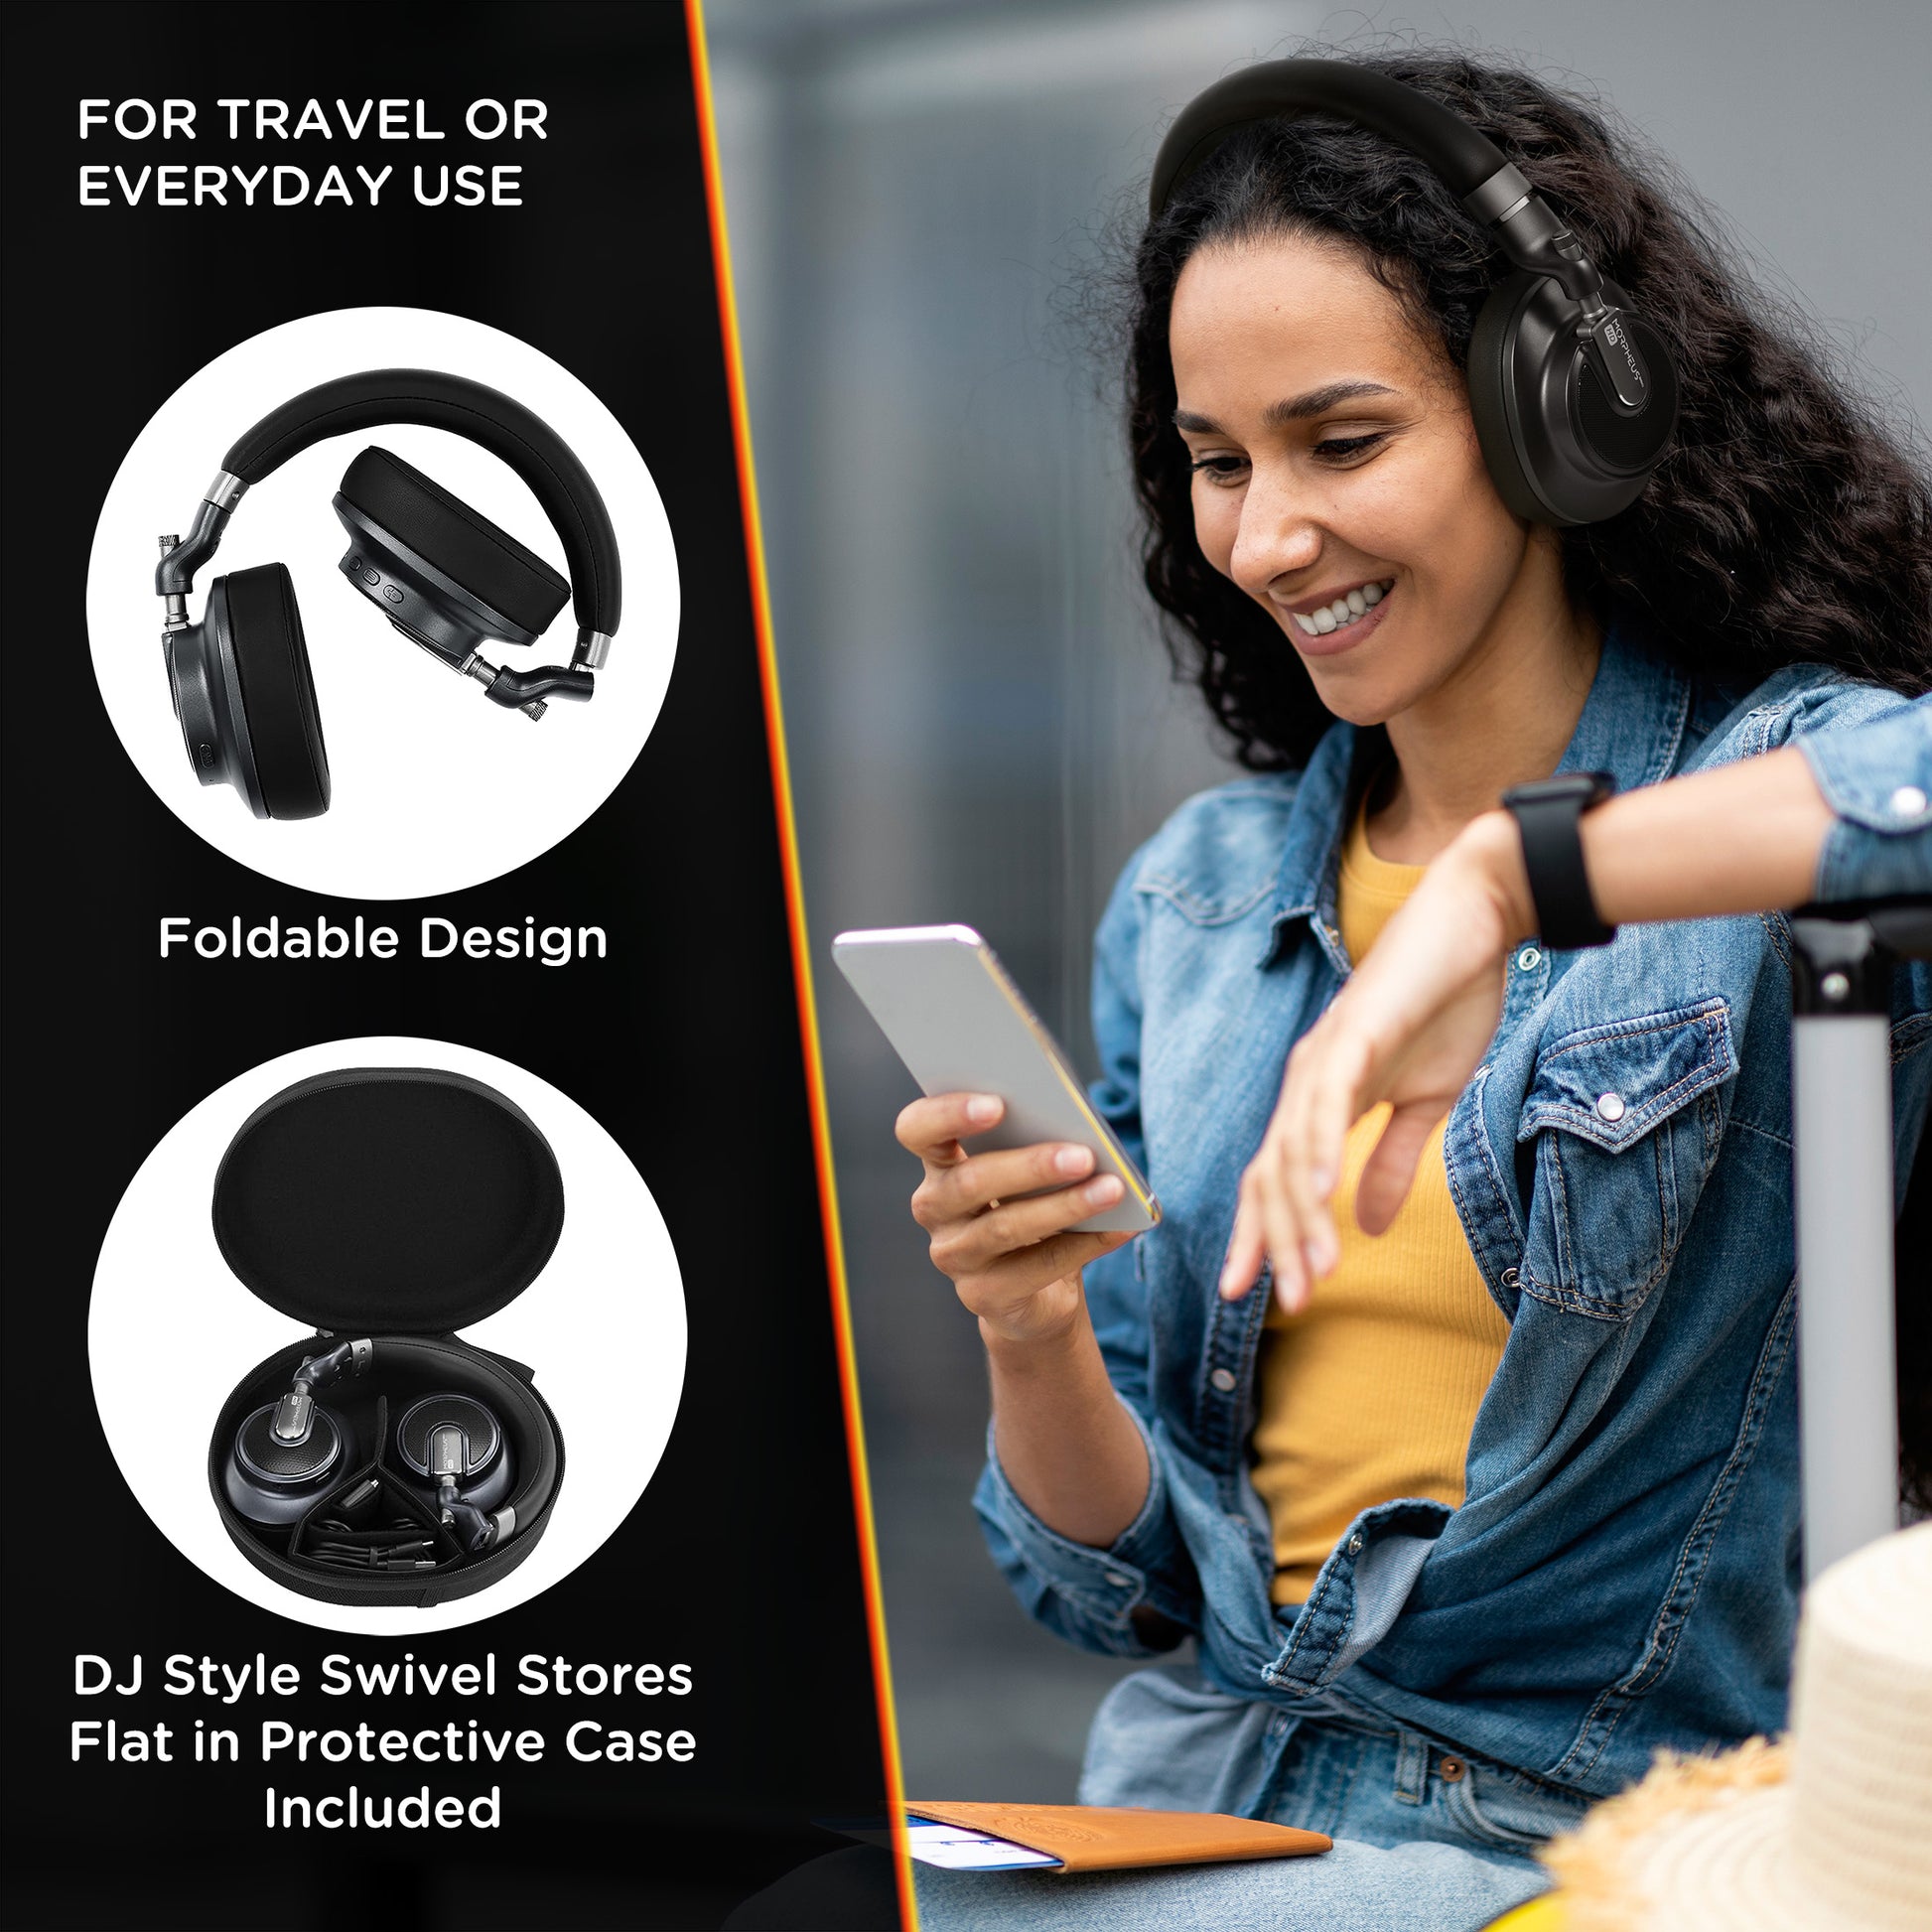 Photo of Morpheus 360 Verve HD Hybrid Wireless ANC Noise Cancelling Headphones show a female using her headphones while on a phone call. The headphones are also displayed showing their foldable design, and how with the DJ Style Swivel Stores Flat in Protective Case that is included.